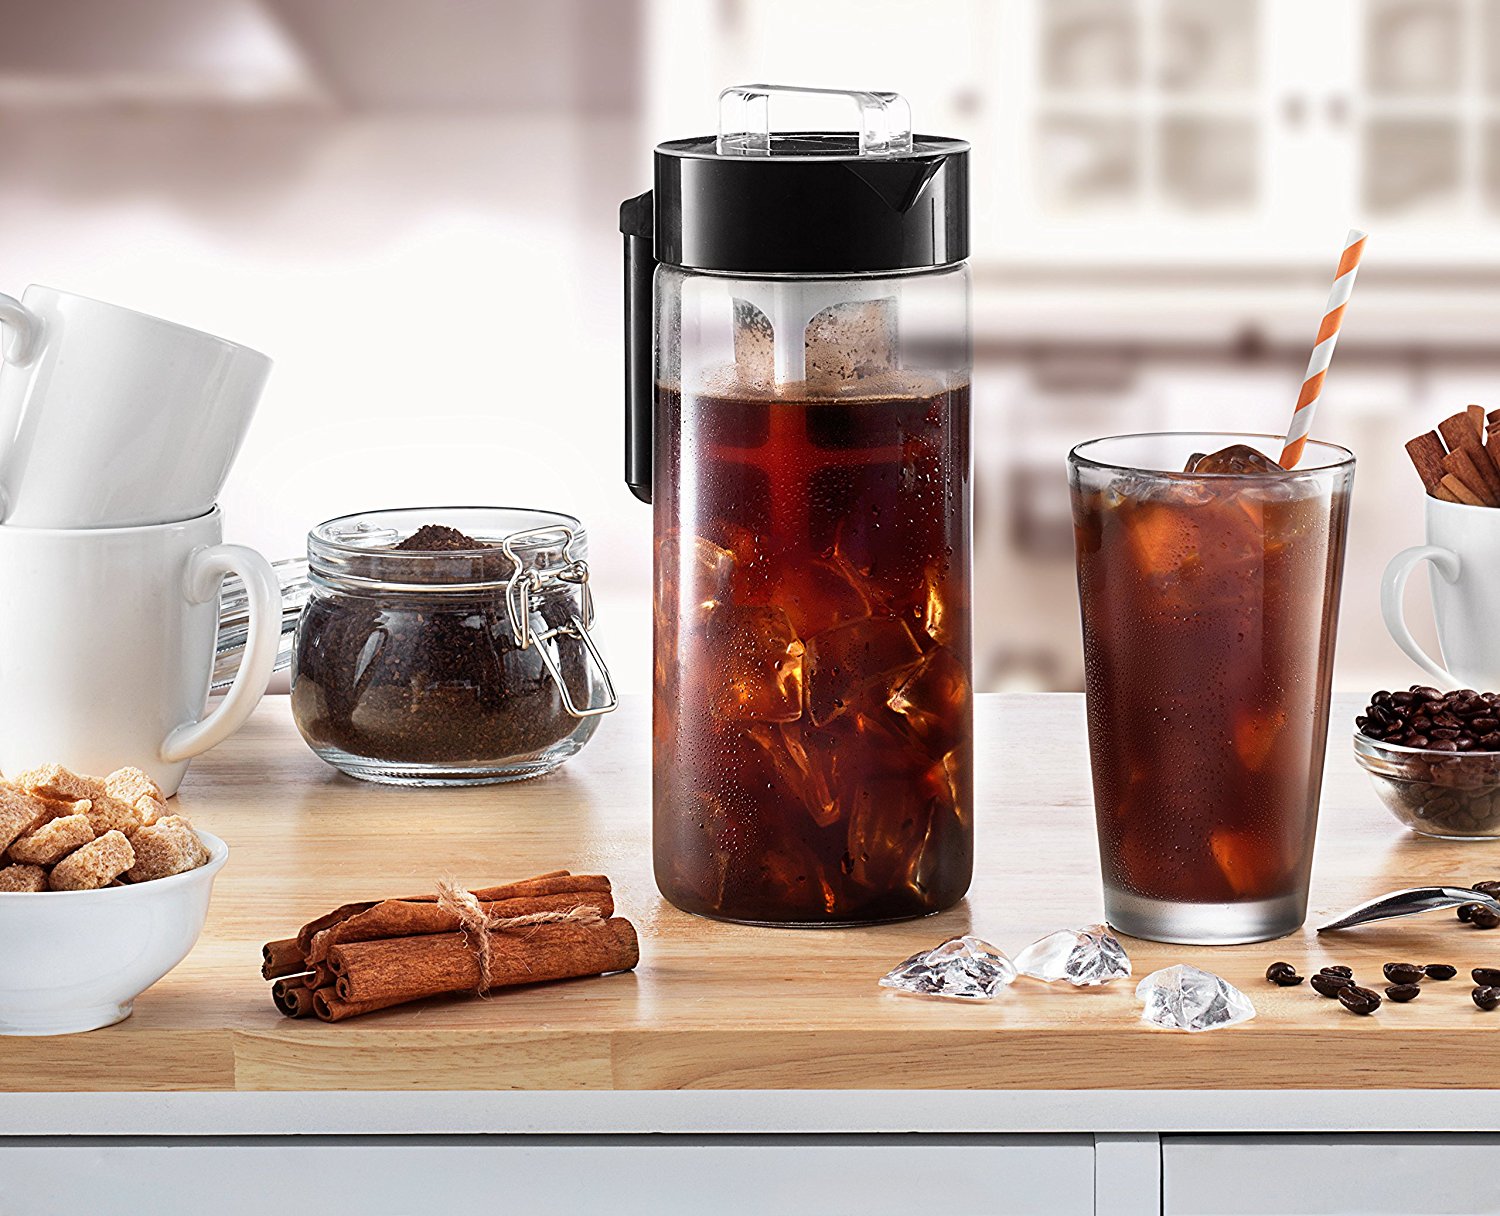 Francois et Mimi glass cold brew coffee maker for $10